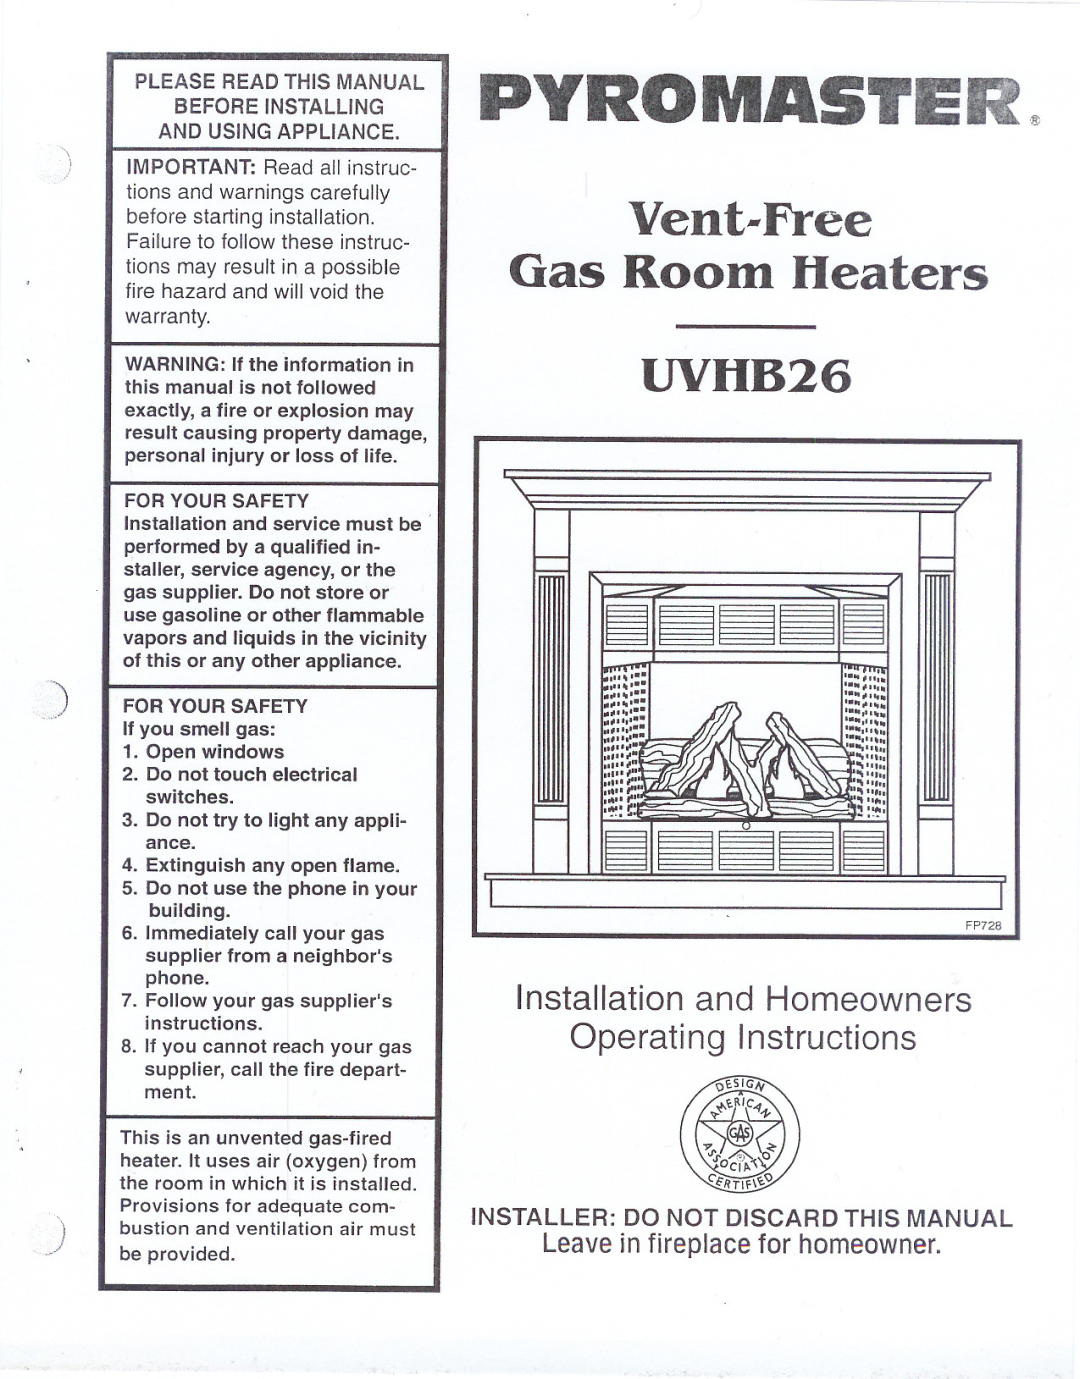 CFM UVHB26 warranty Please Read this Manual Before Installing Using Appliance, For Your Safety 